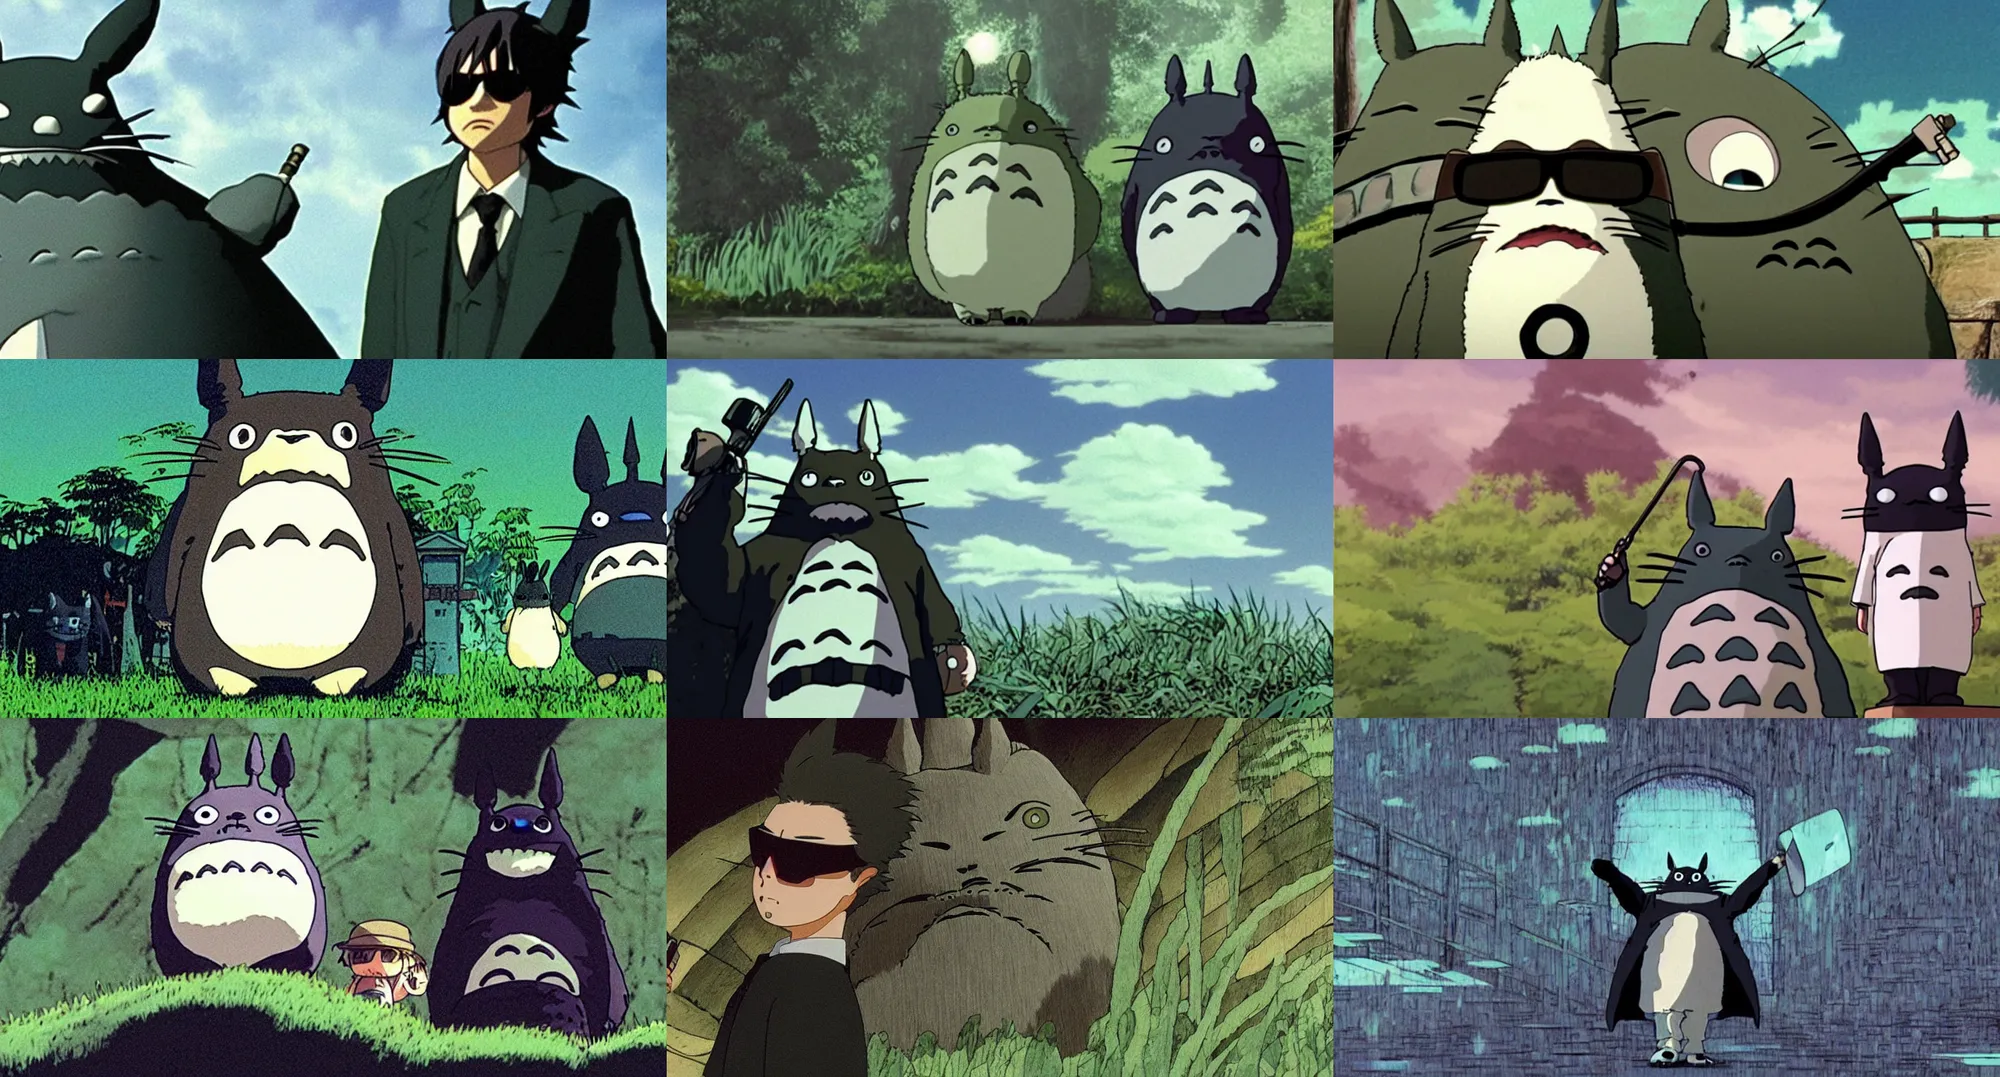 Prompt: award - wining extreme wide shot movie still of totoro as neo in the matrix, wearing sunglasses and a black trenchcoat, by studio ghibli, high detail